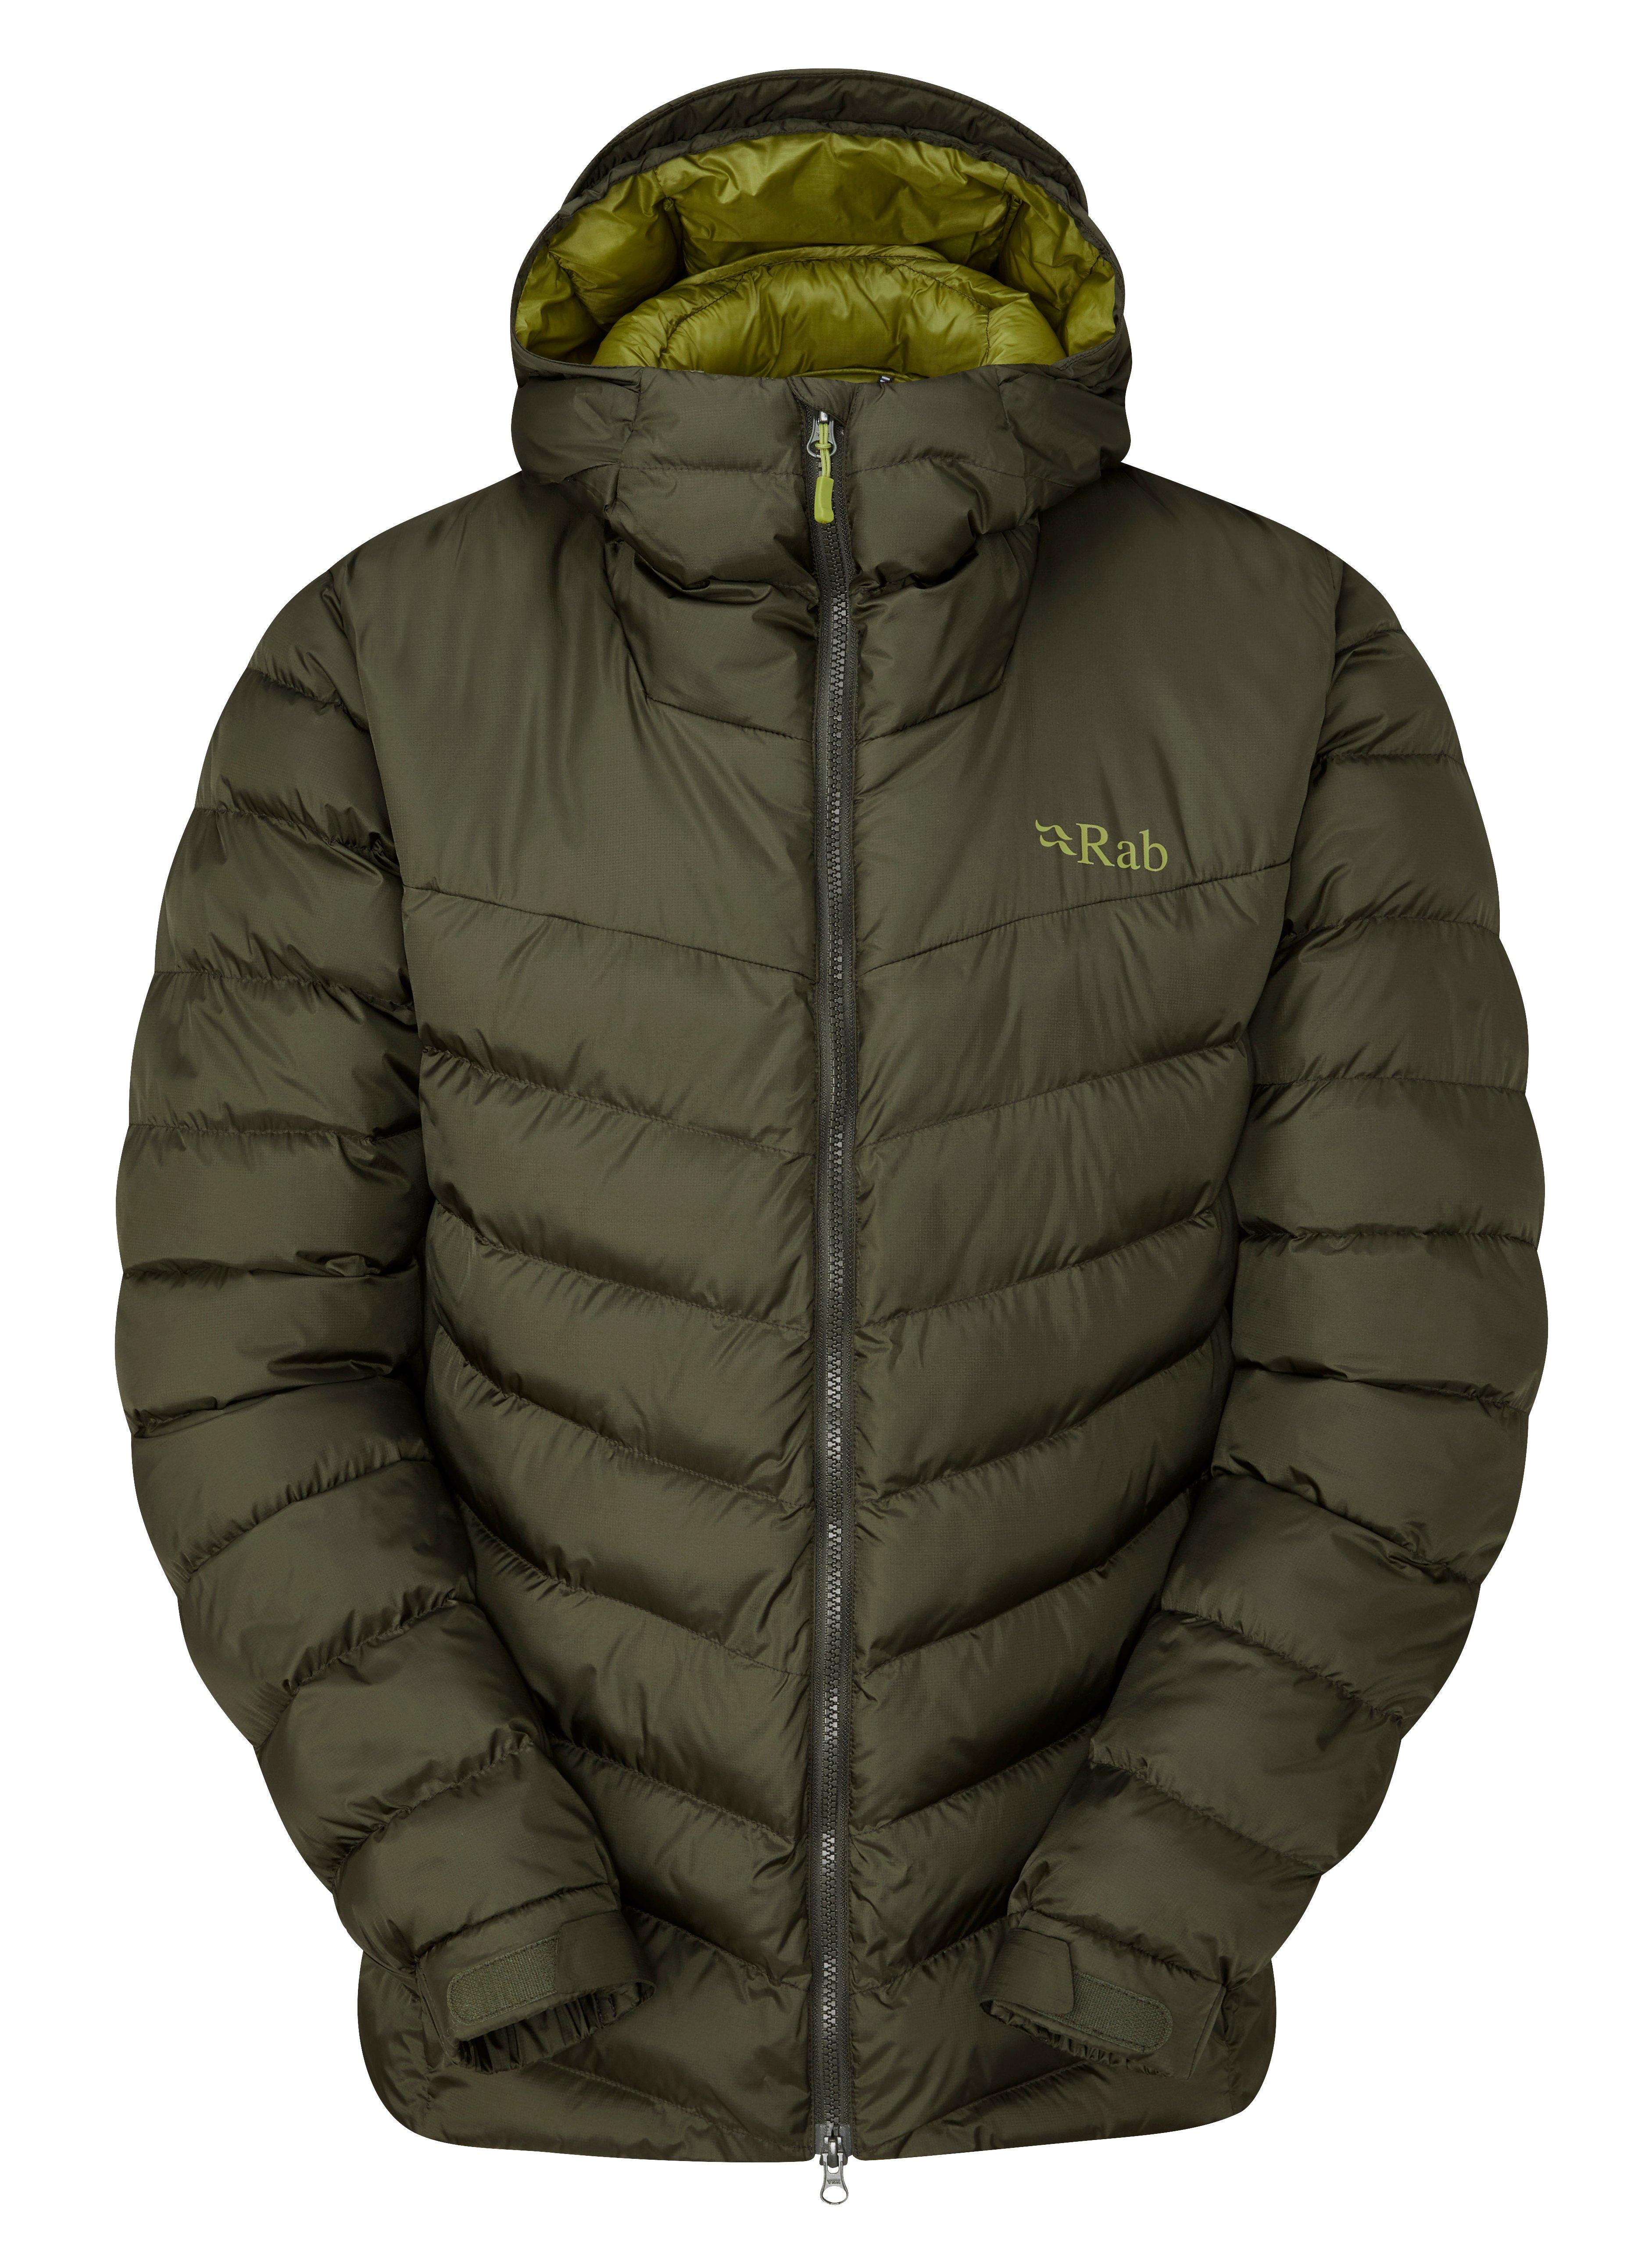 Mens | Clothing | Jackets | Down & Insulated Jackets | George Fisher